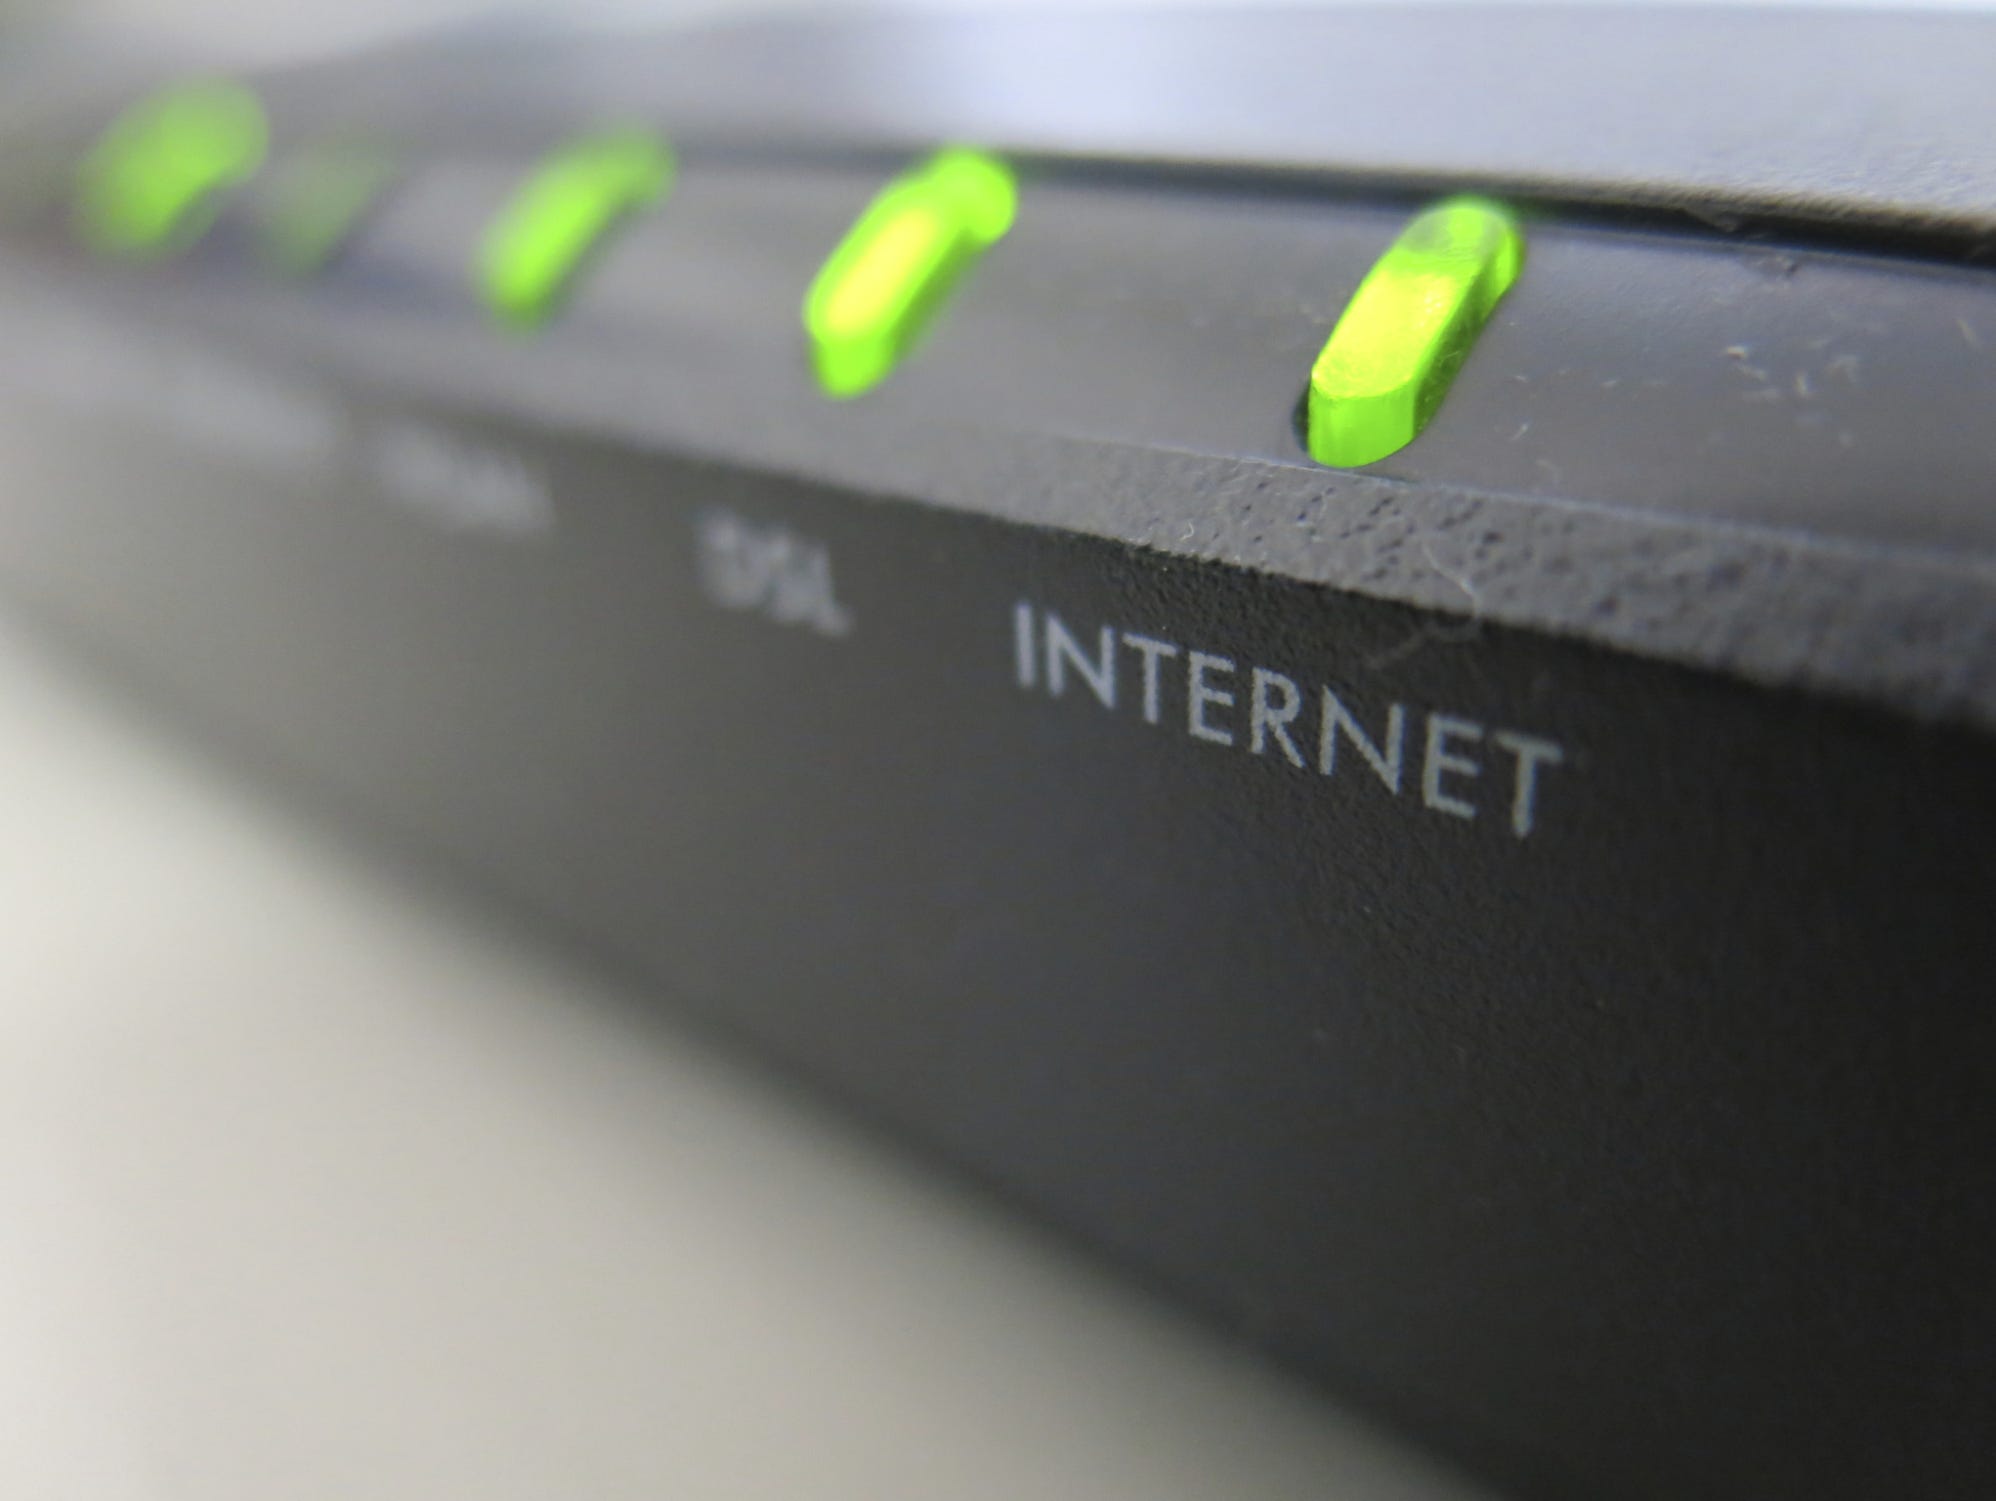 Routers are prone to hacking, but there are ways to keep them secure.